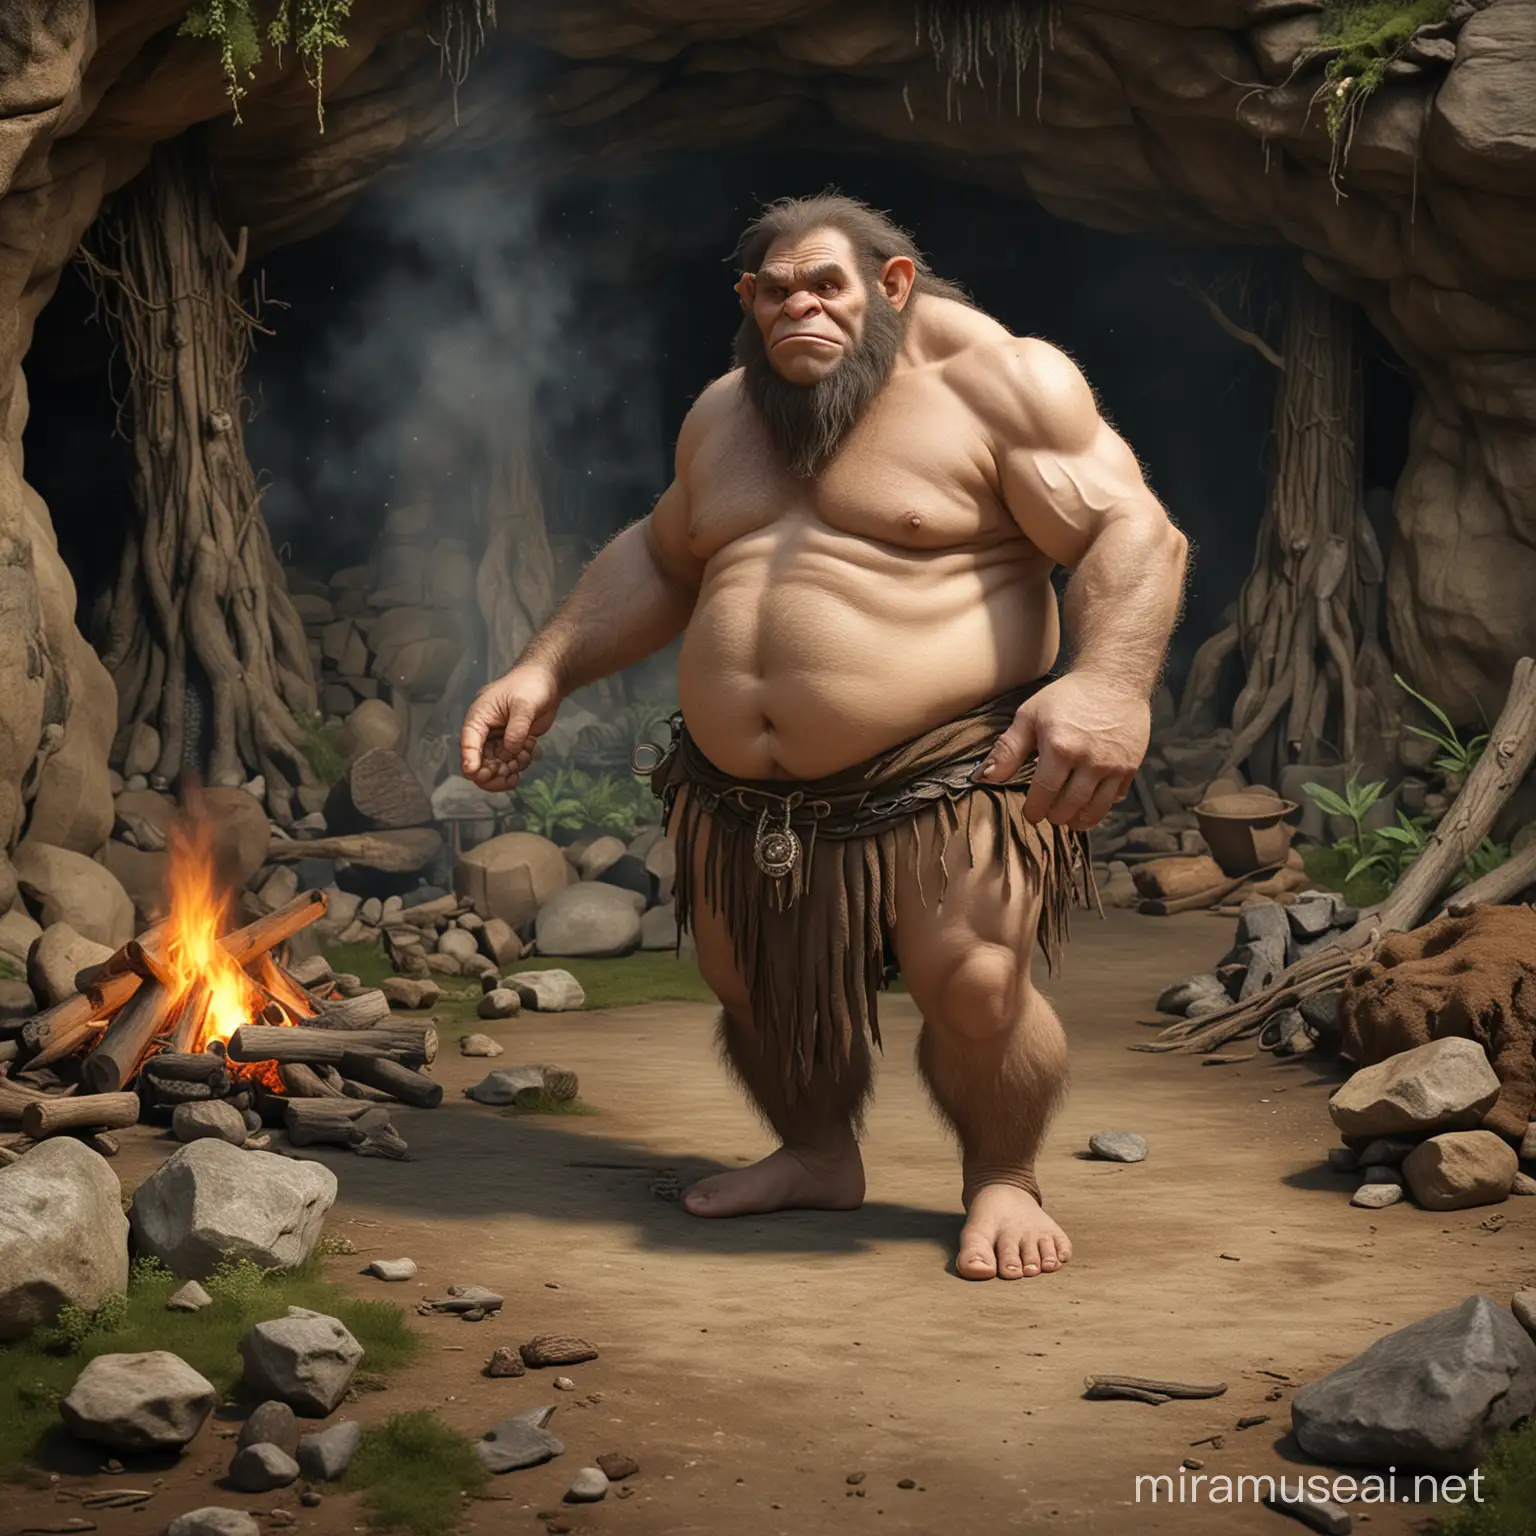 troll,loincloth,chubby,barefoot,hairy,loincloth,forest cave background,primitivism,giant feet,camp fire,realistic